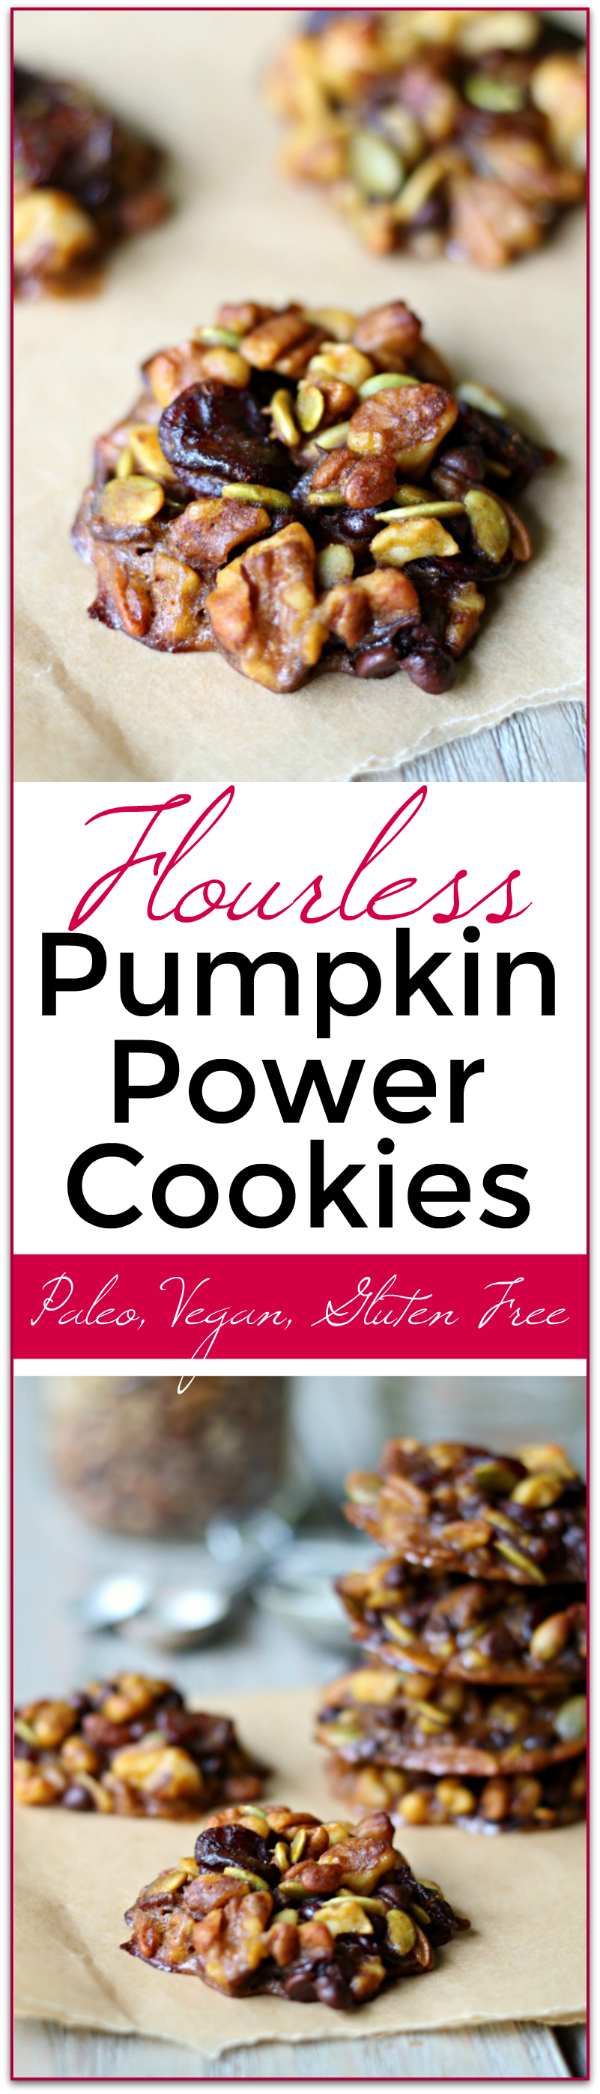 We love these flourless Pumpkin Power Cookies! Jam packed with nutrition and something my whole family likes! Makes a great grab and go healthy snack. Paleo, Gluten Free and Vegan.